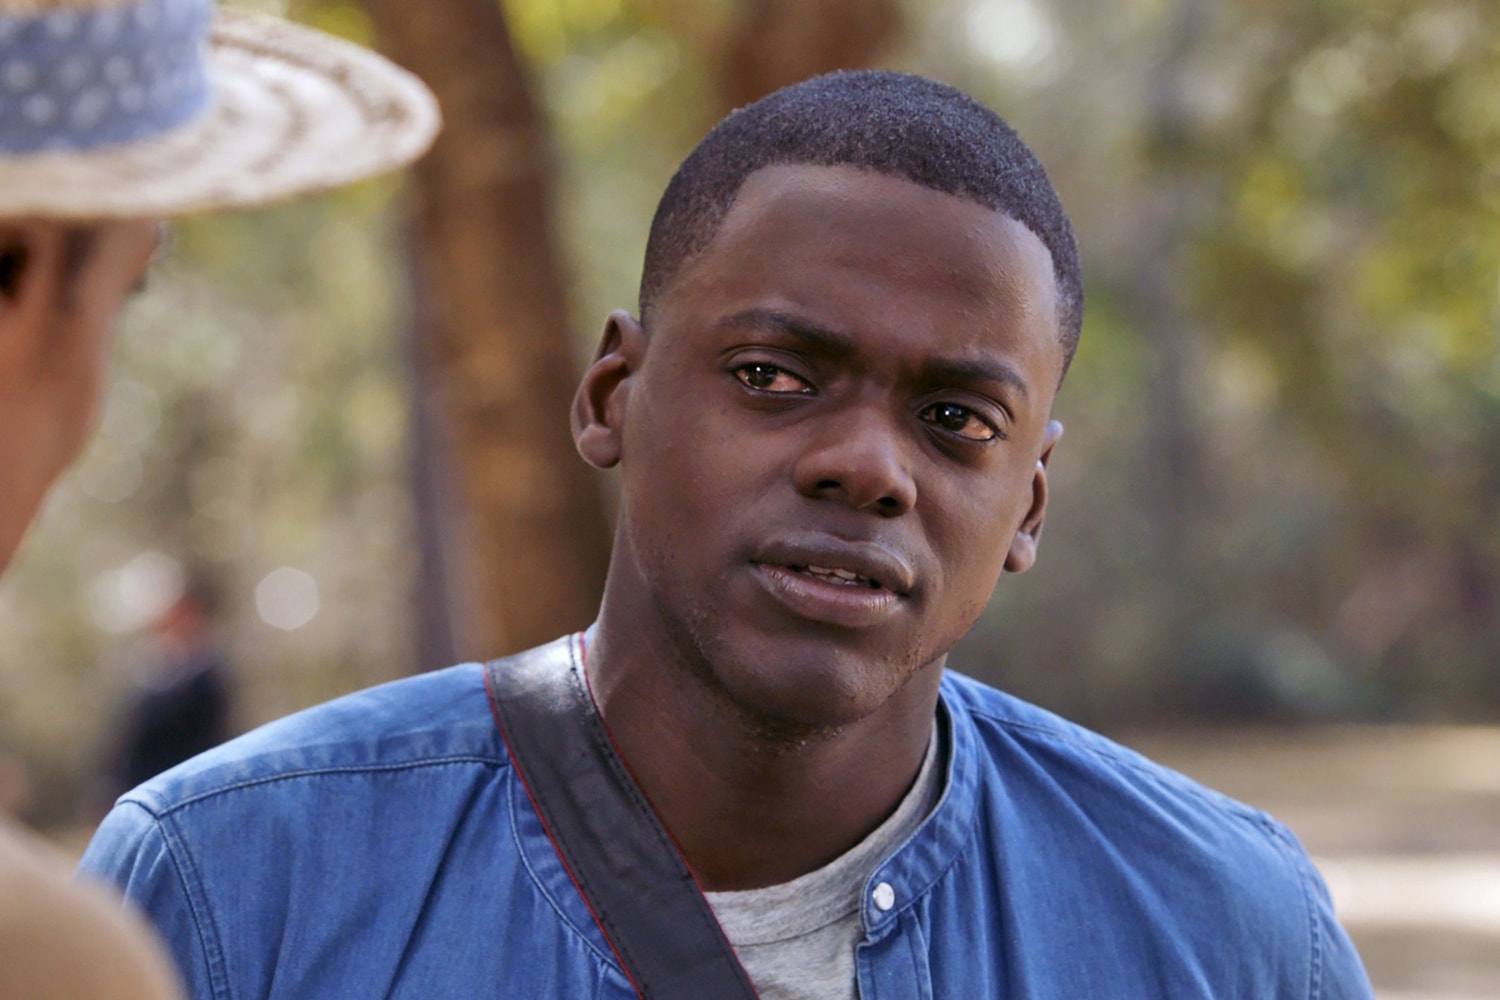 Watch the Grim Alternate Ending of 'Get Out'